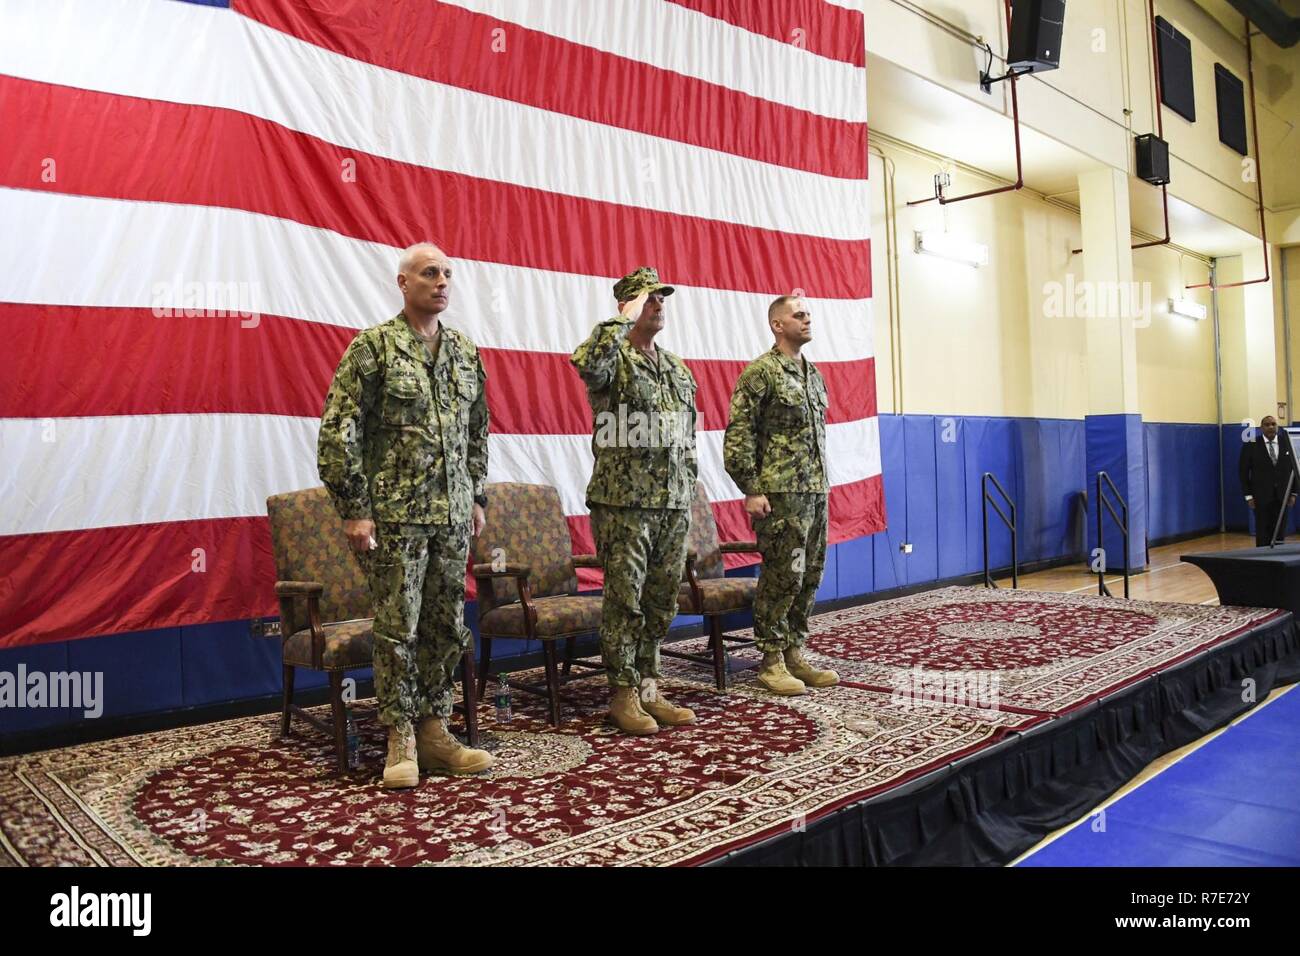 MANAMA, Bahrain (Dec. 5, 2018) Vice Chief of Naval Operations Adm. Bill Moran, center, salutes as “Taps” plays during a memorial service honoring Vice Adm. Scott Stearney’s life.  Stearney was formerly commander of U.S.  Naval Forces Central Command, U.S. 5th Fleet and Combined Maritime Forces. The U.S. 5th Fleet area of operations encompasses nearly 2.5 million square miles of water area and includes the Arabian Gulf, Gulf of Oman, Red Sea and parts of the Indian Ocean. The region is comprised of 20 countries and includes three critical choke points at the Strait of Hormuz, the Suez Canal and Stock Photo